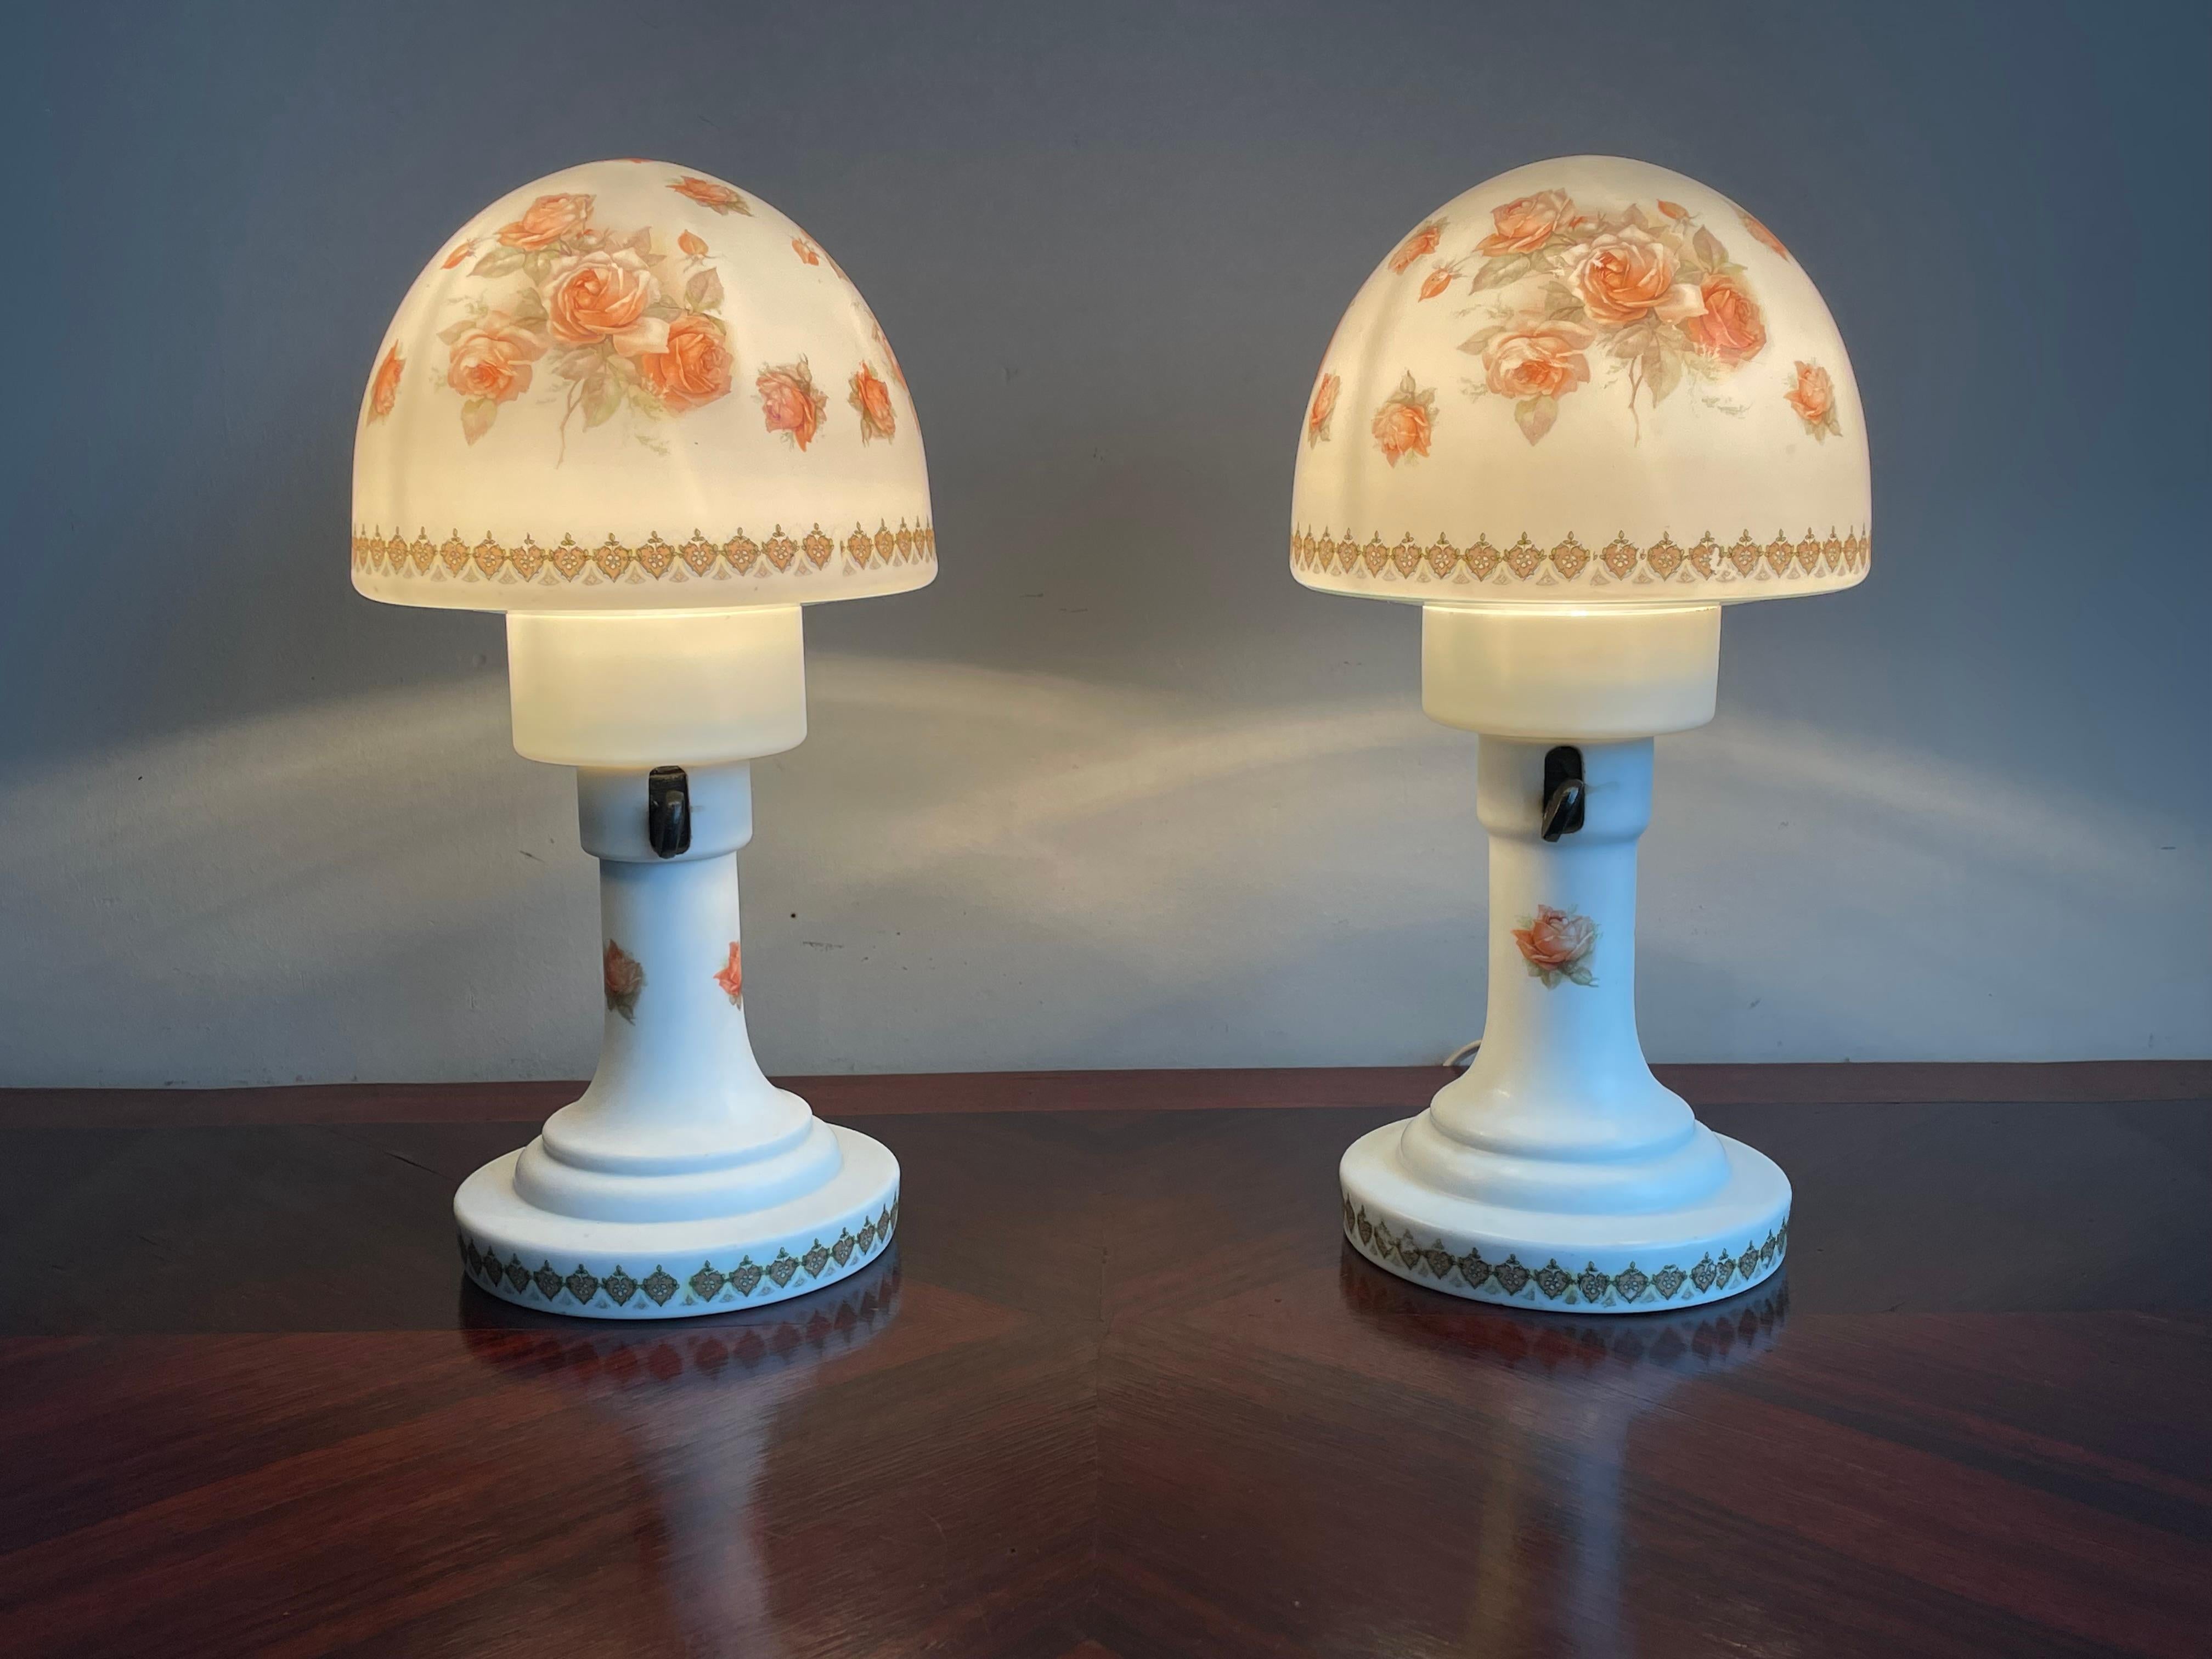 Wonderful materials and truly stylish design table lamps.

Thanks to their elegant and timeless designs these handcrafted and handsome antique table lamps will never fail to impress. Finding the right lighting solution without going for the